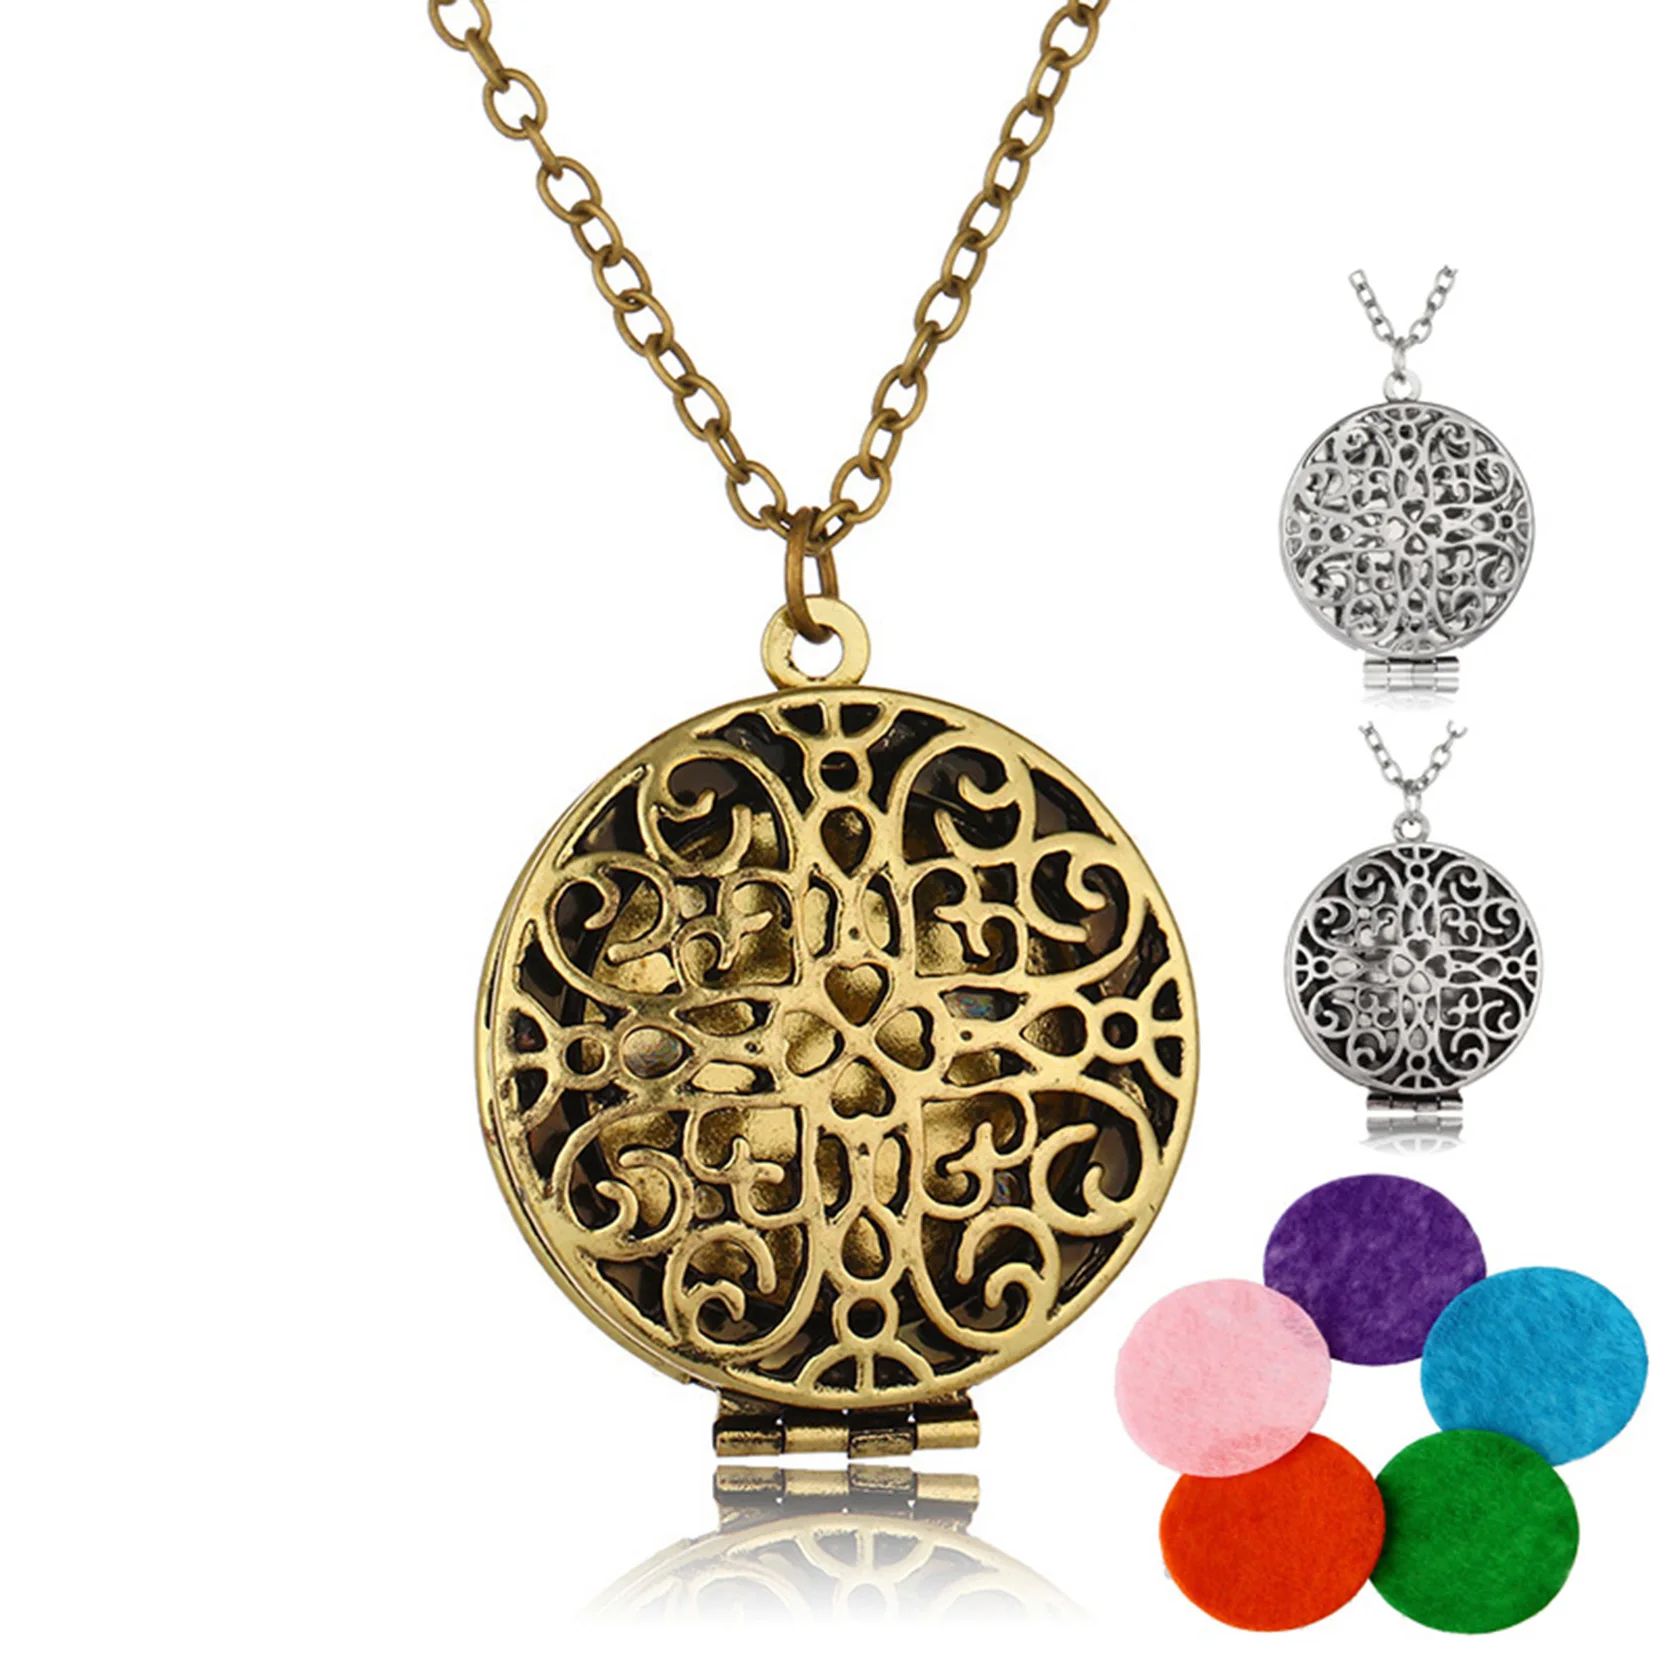 Aromatherapy Essential Oil Necklace with Bronze/Silver Color Flower ...